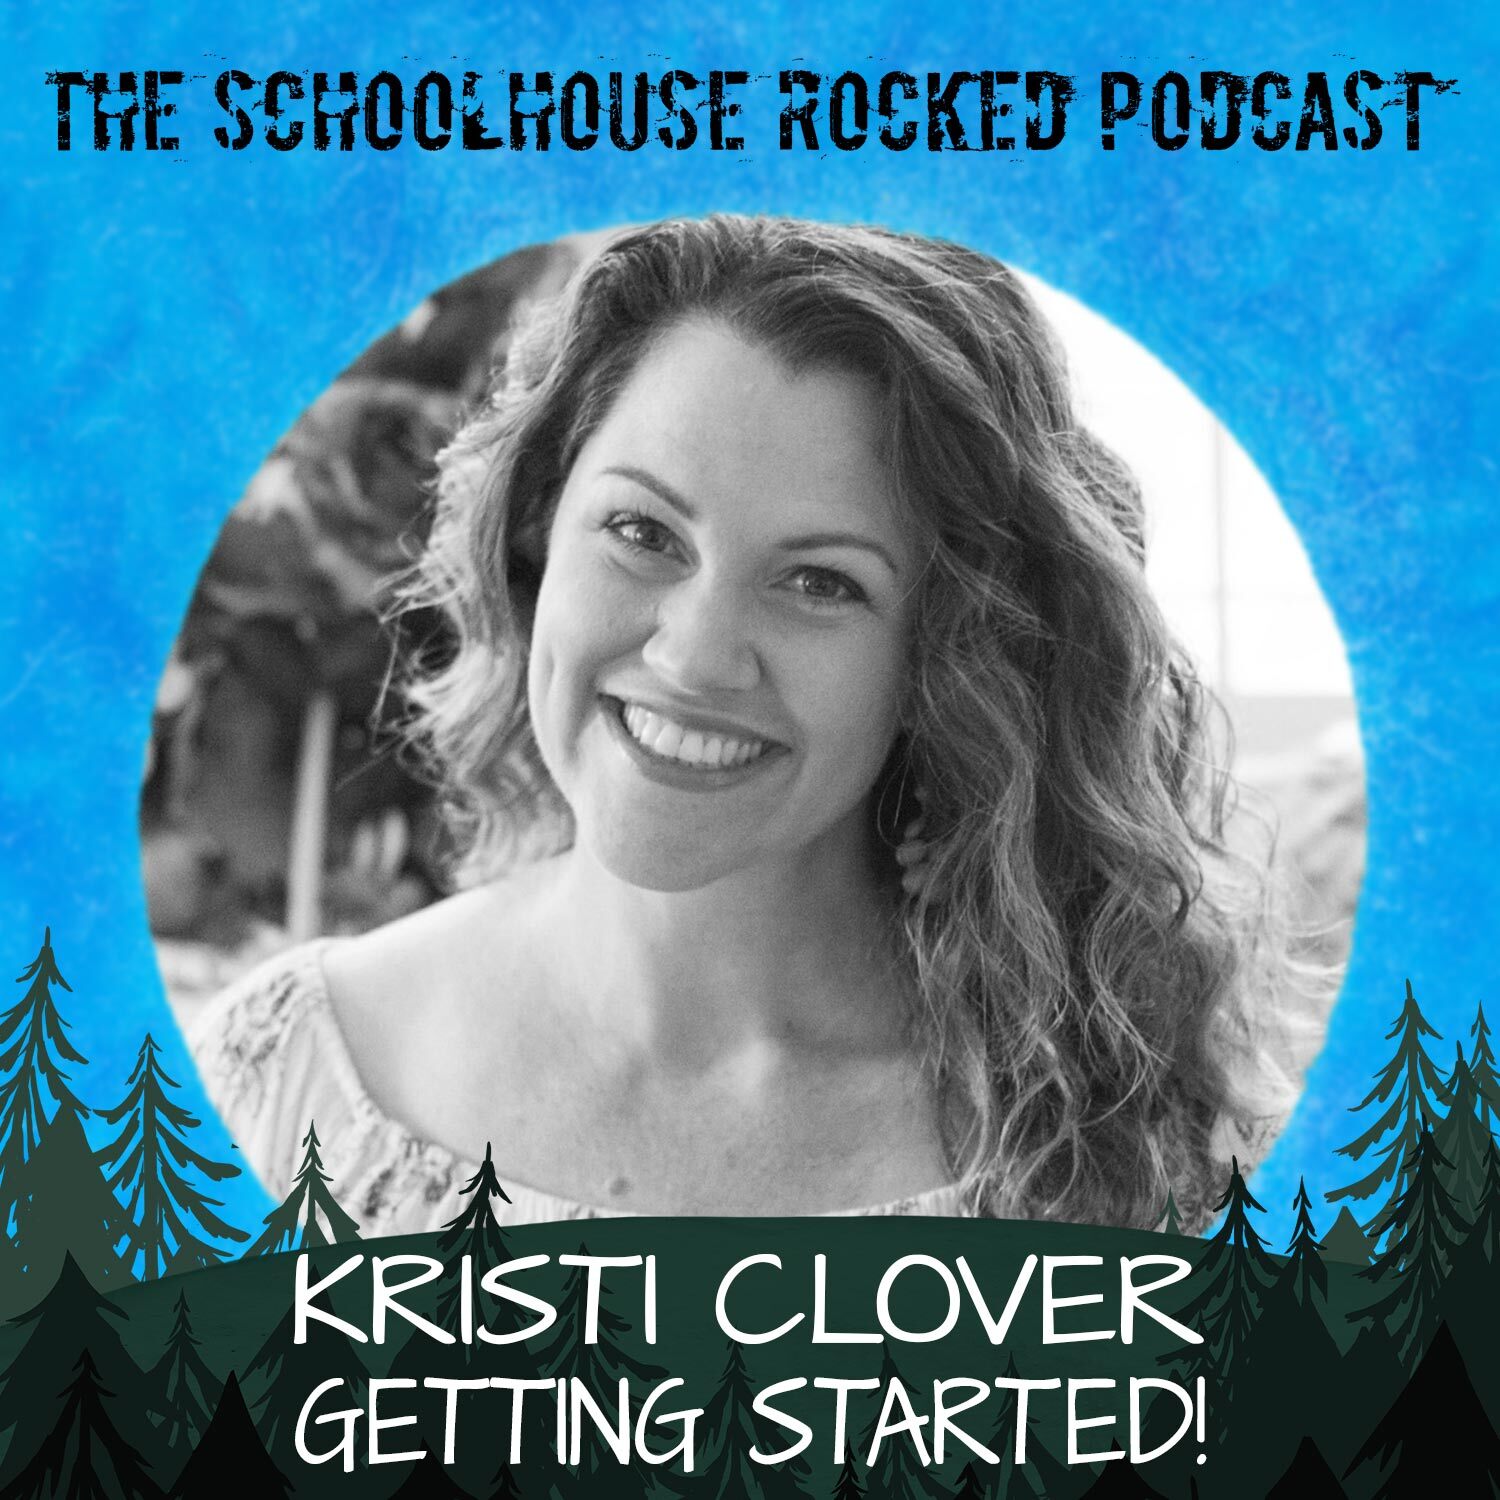 How to Start Homeschooling - Interview with Kristi Clover - Home Education Podcast